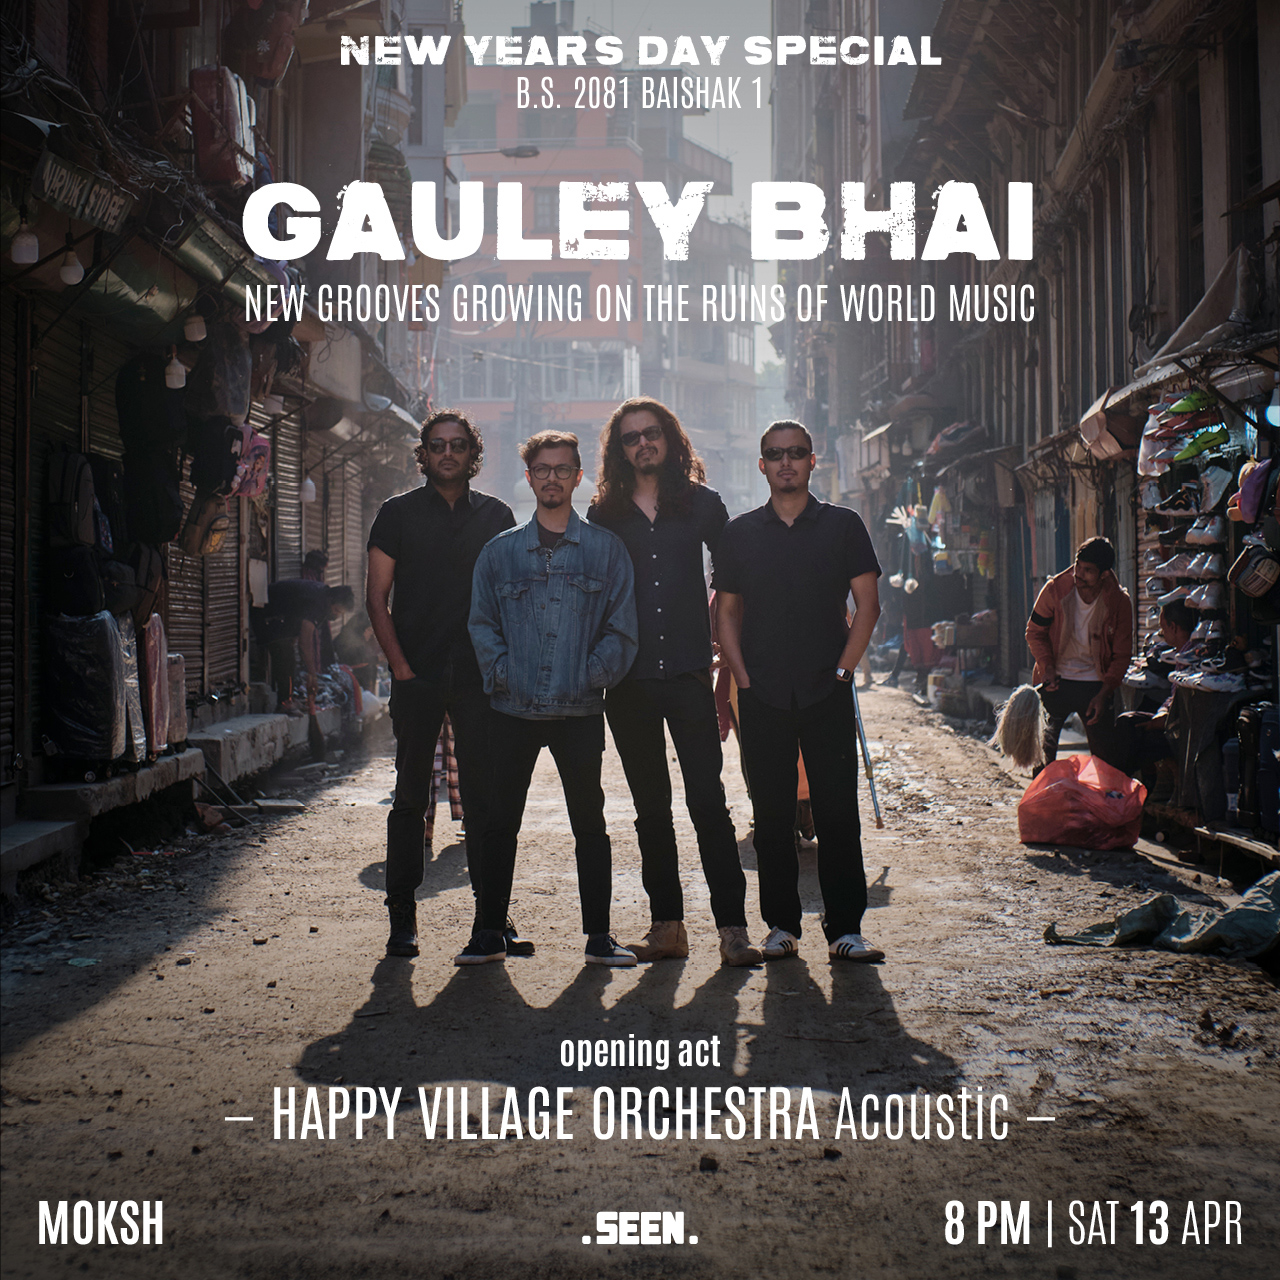 New Year's Day Special with Gauley Bhai